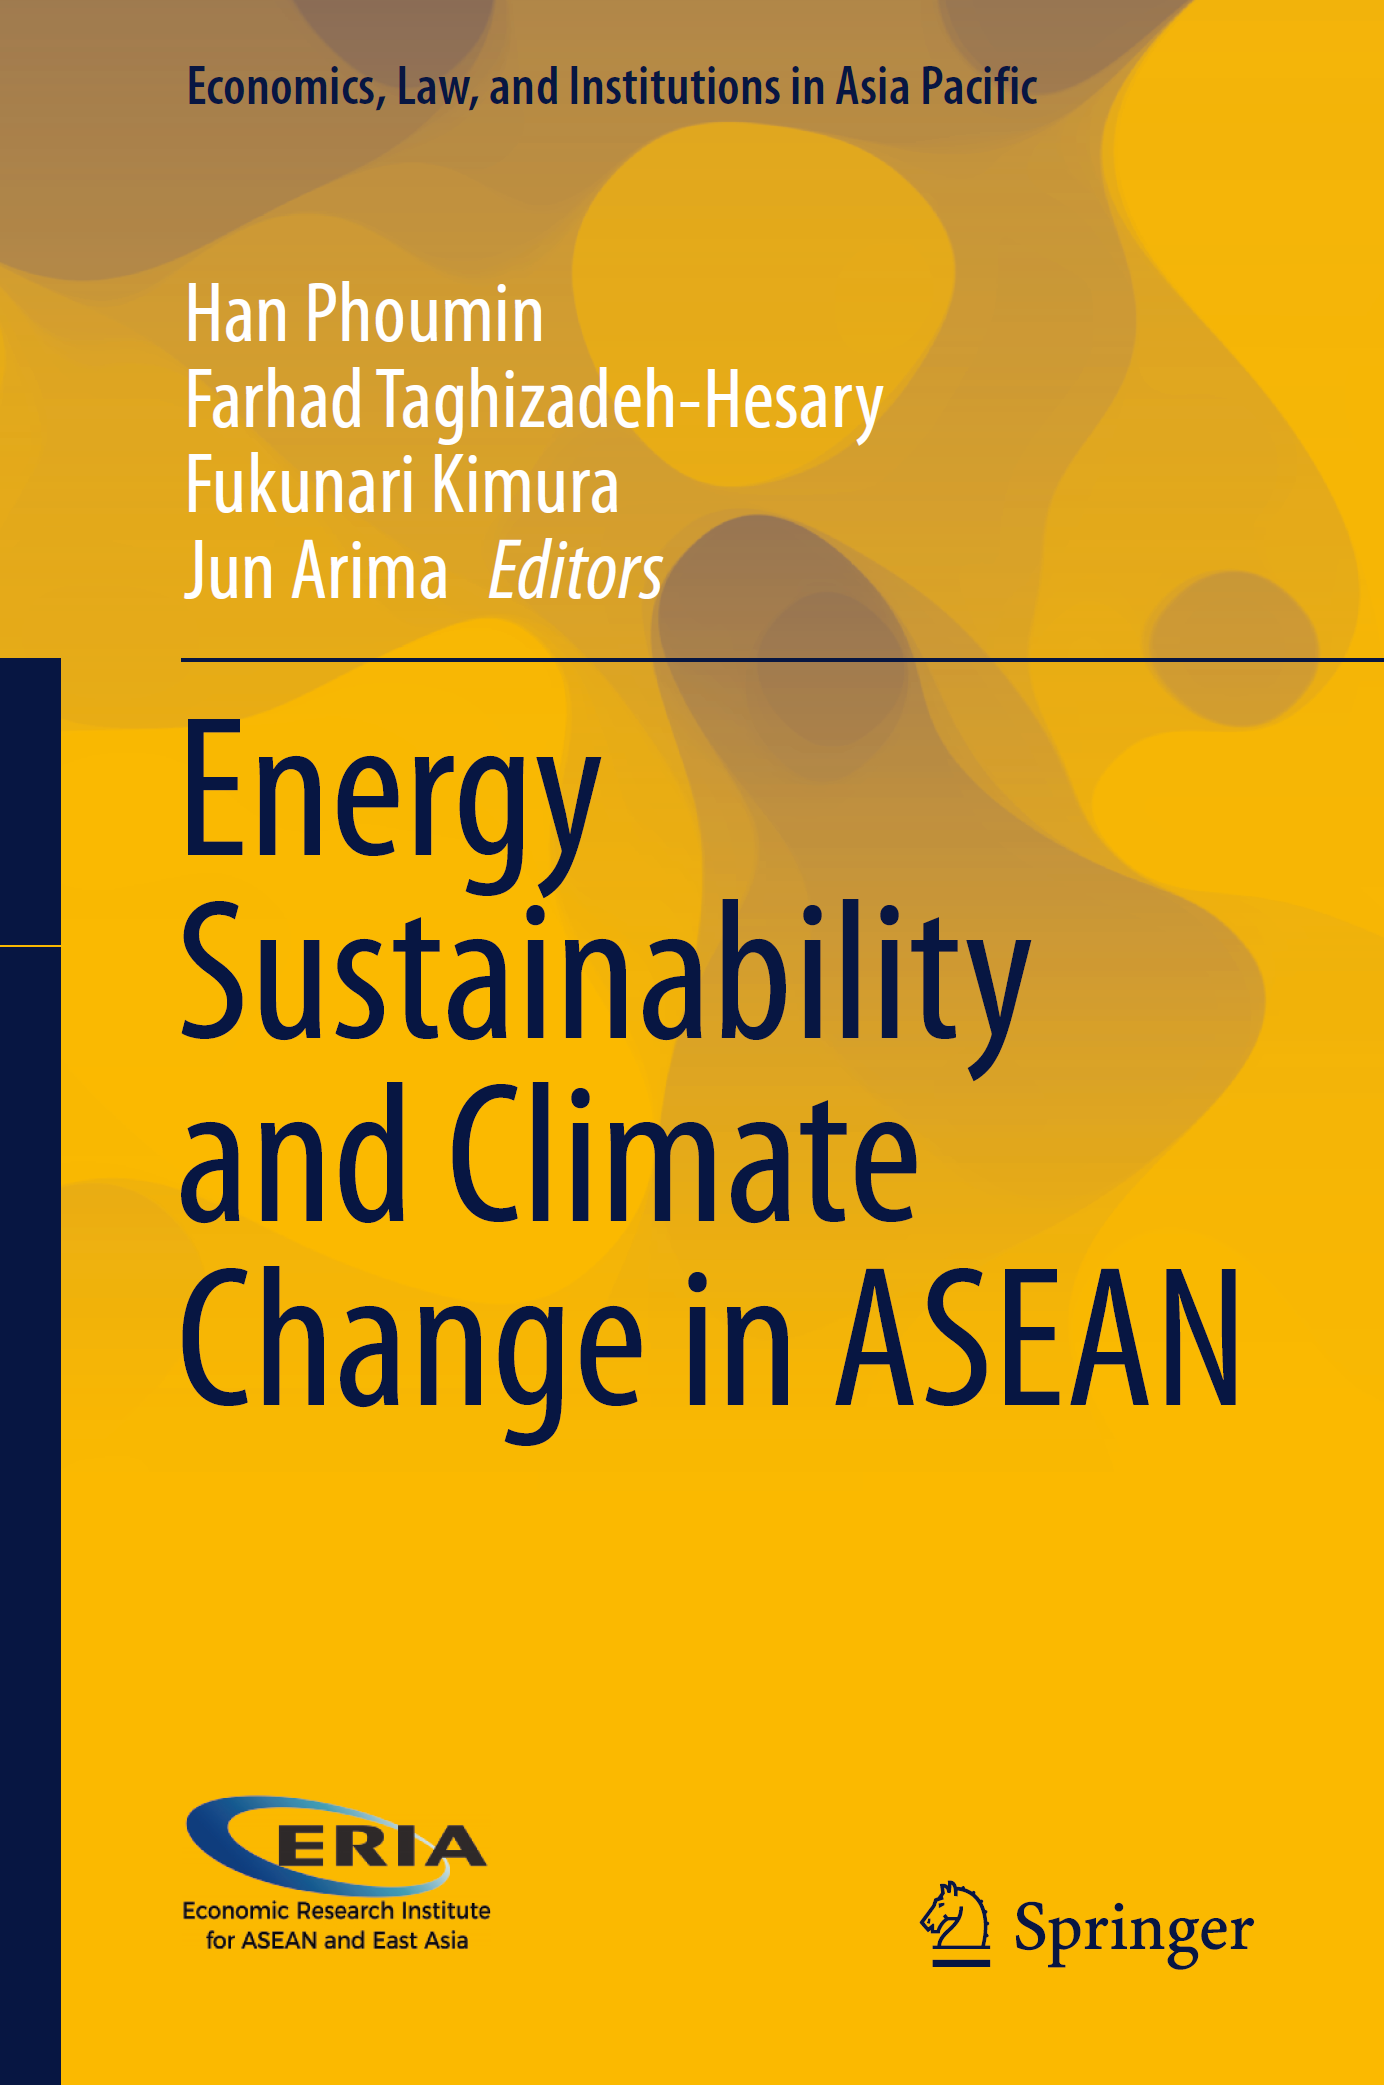 Expediting Transition Towards HELE Coal-Fired Electricity Generation Technologies in Southeast Asia: A Comparative Economic Analysis of HELE and Subcritical Coal-Fired Technologies